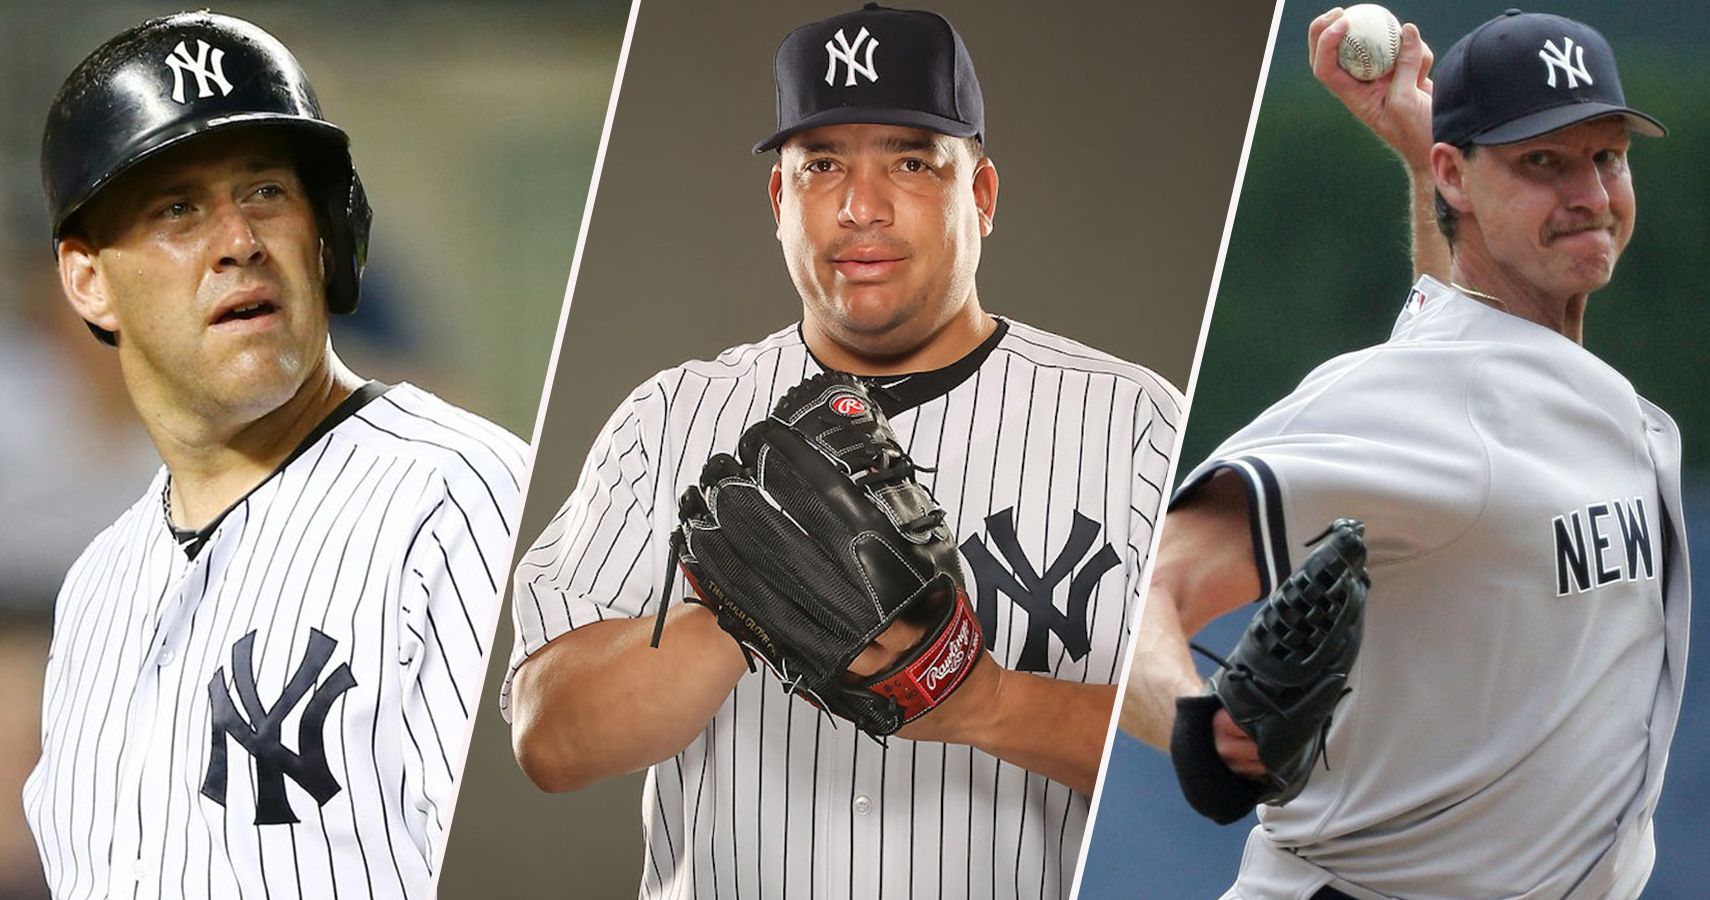 20 MLB Players Everyone Forgets Played For The New York Yankees1710 x 900